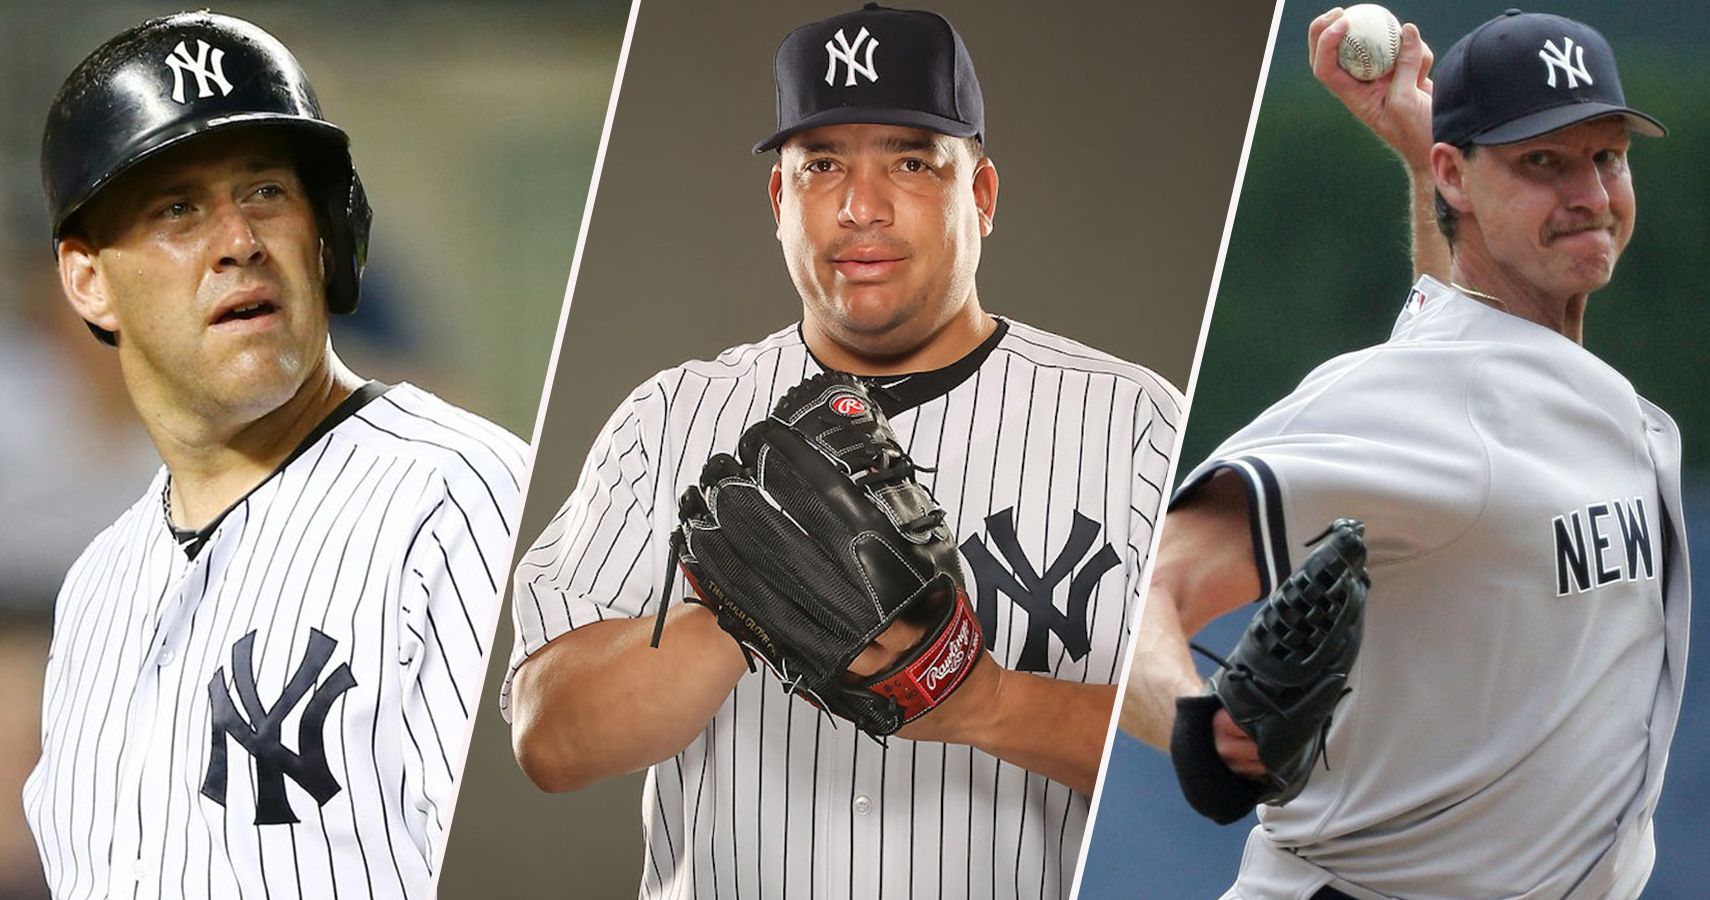 20 MLB Players Everyone Forgets Played For The New York Yankees1710 x 900